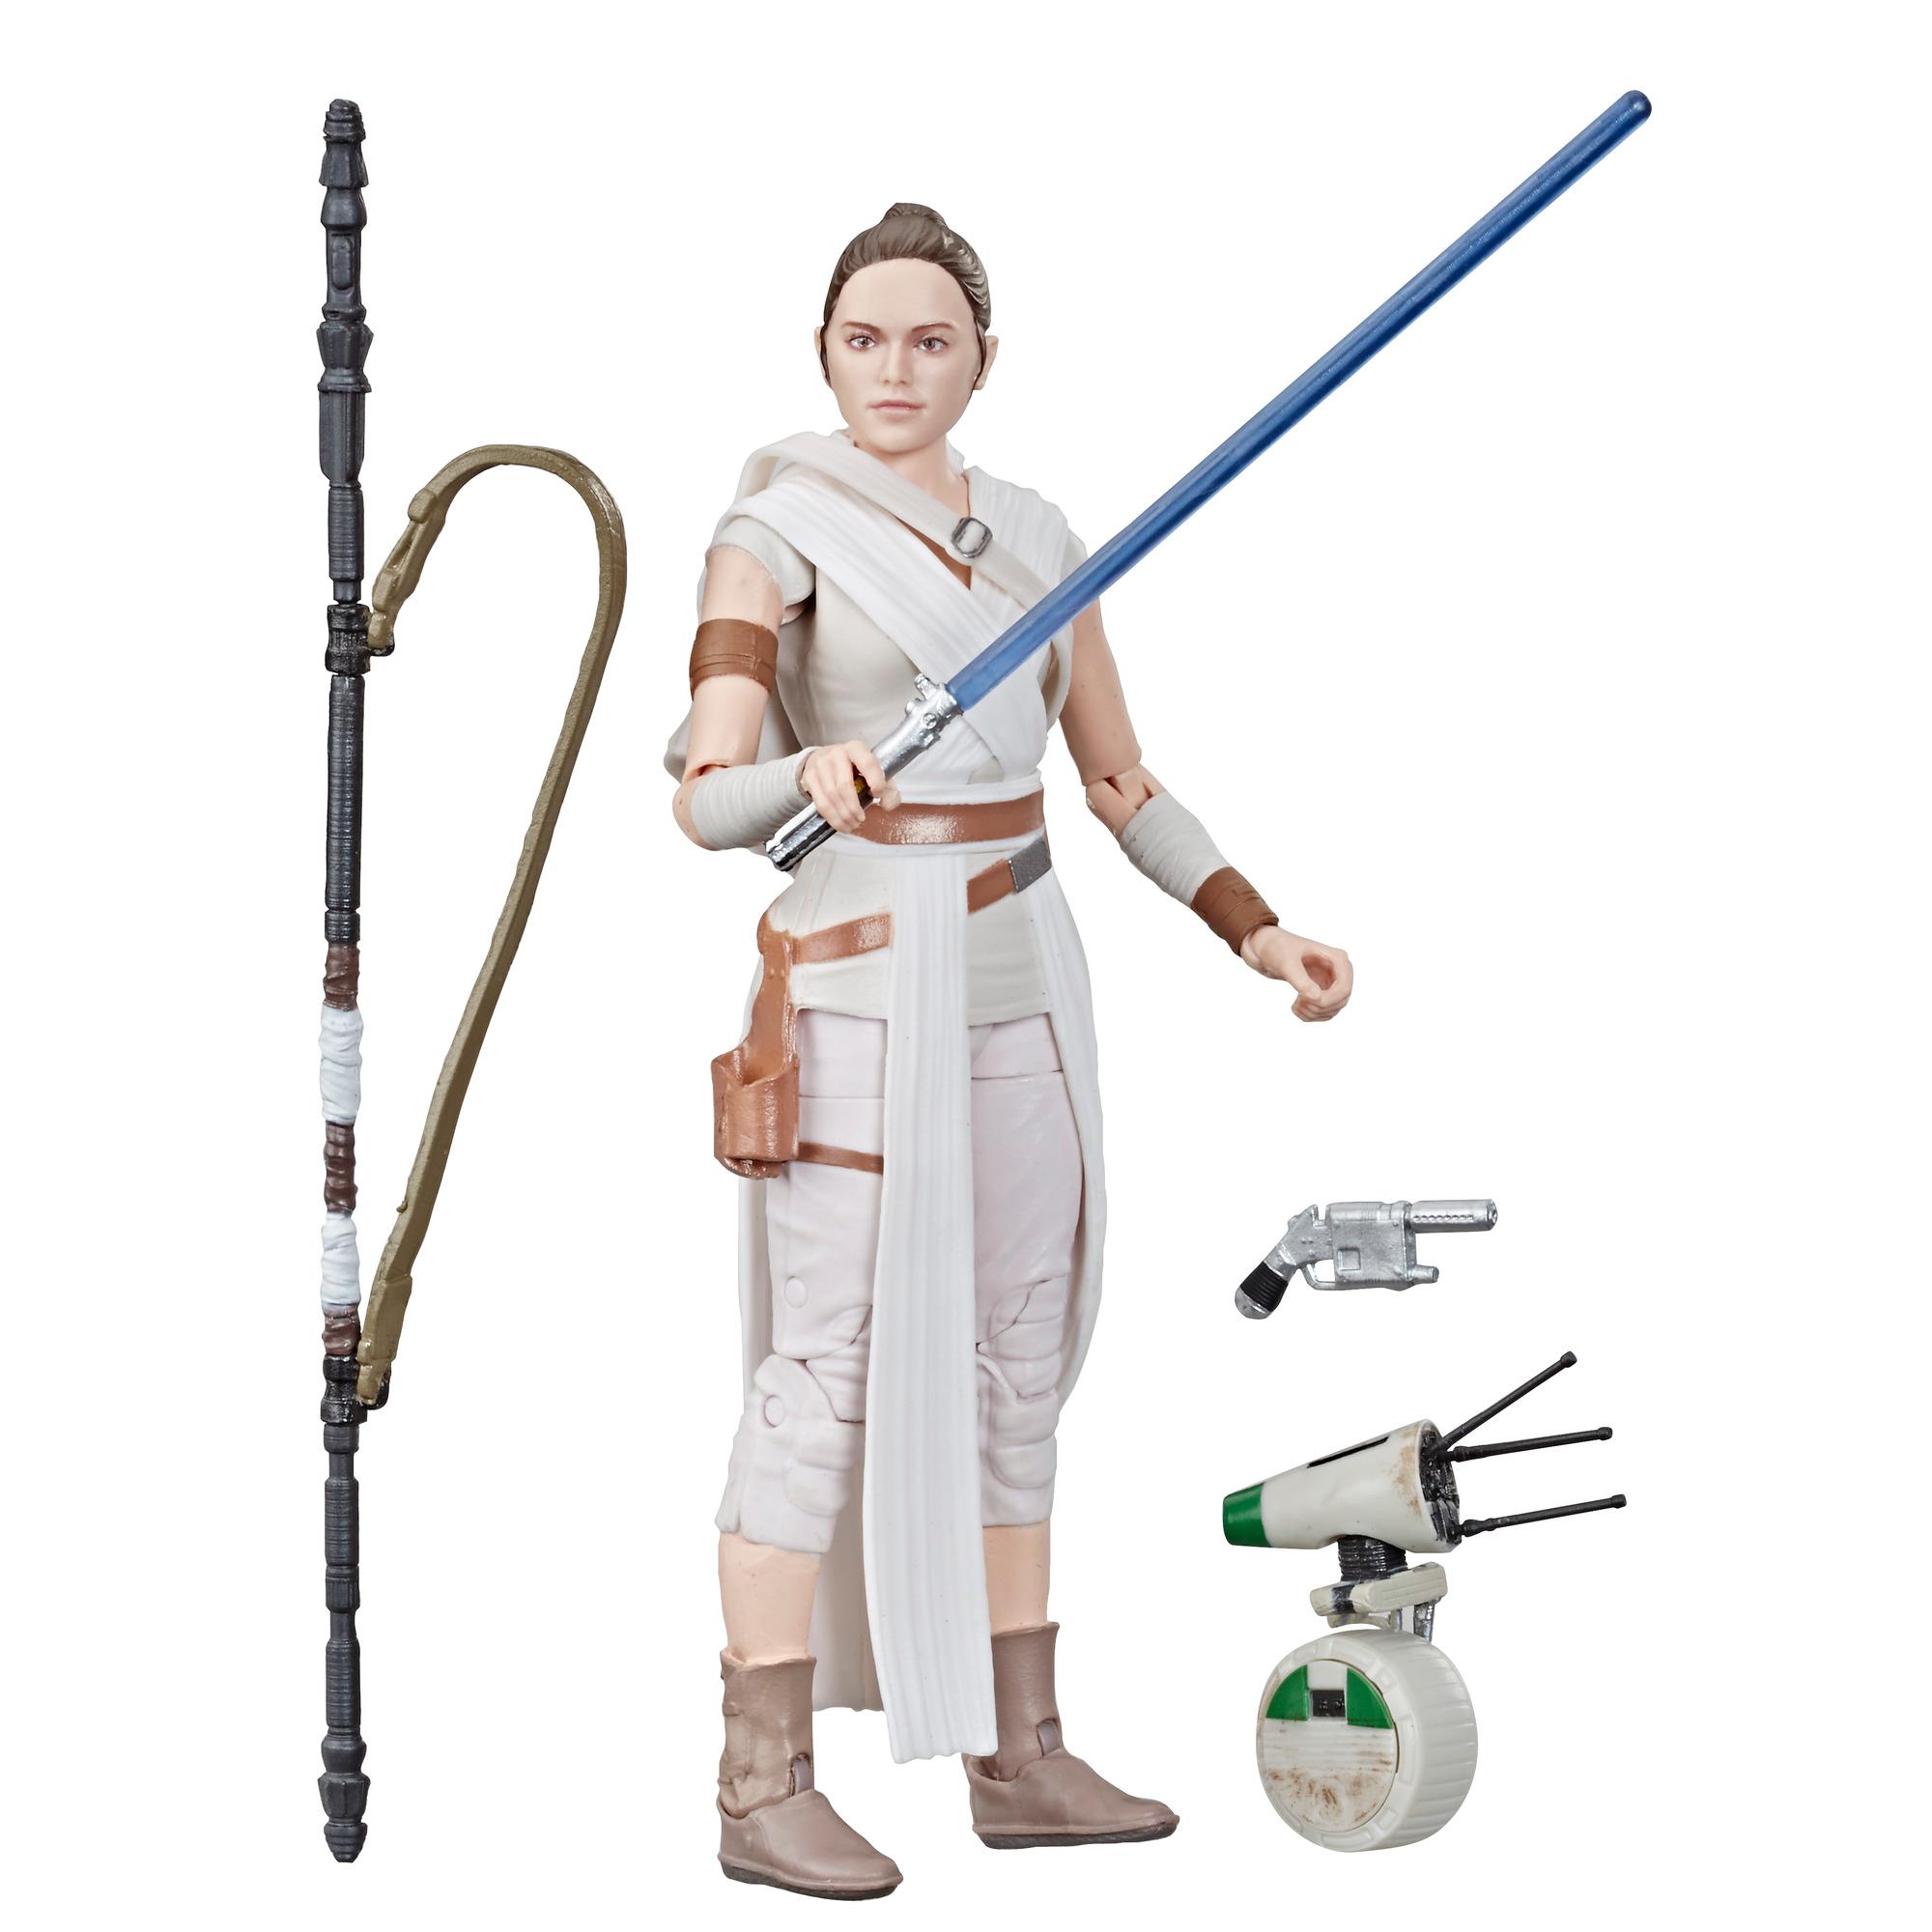 Hasbro E4077AS00 Star Wars The Black Series Rey & D-O Toy 6 inch Action Figure for sale online 